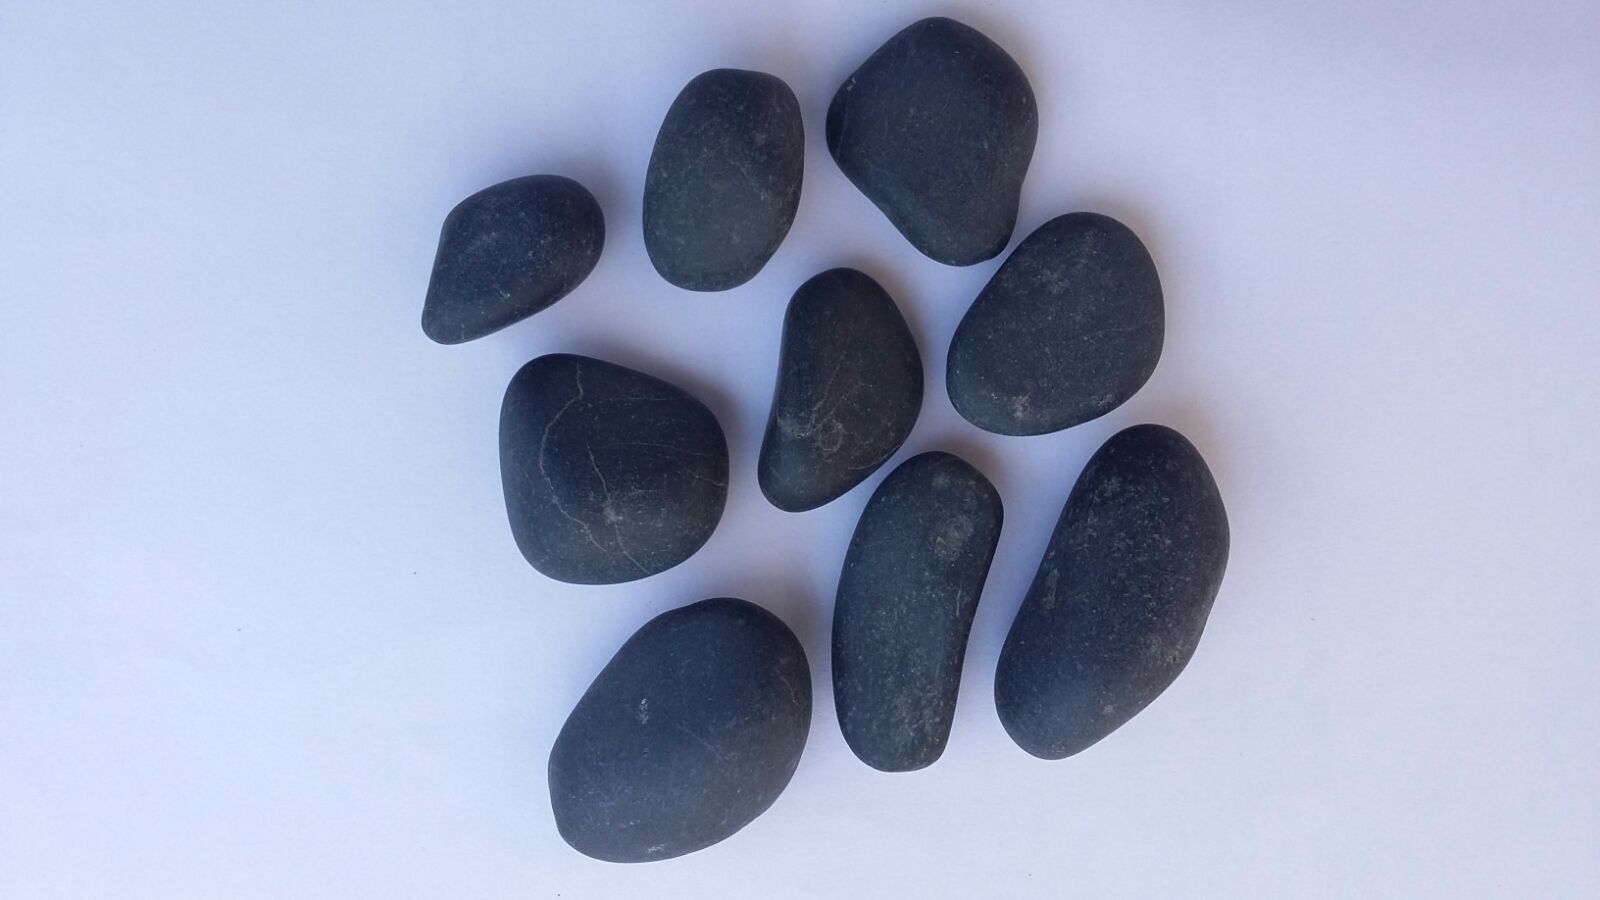 Grey and black Natural River Pebble and Quartz stone rock For Garden Decoration And Landscaping